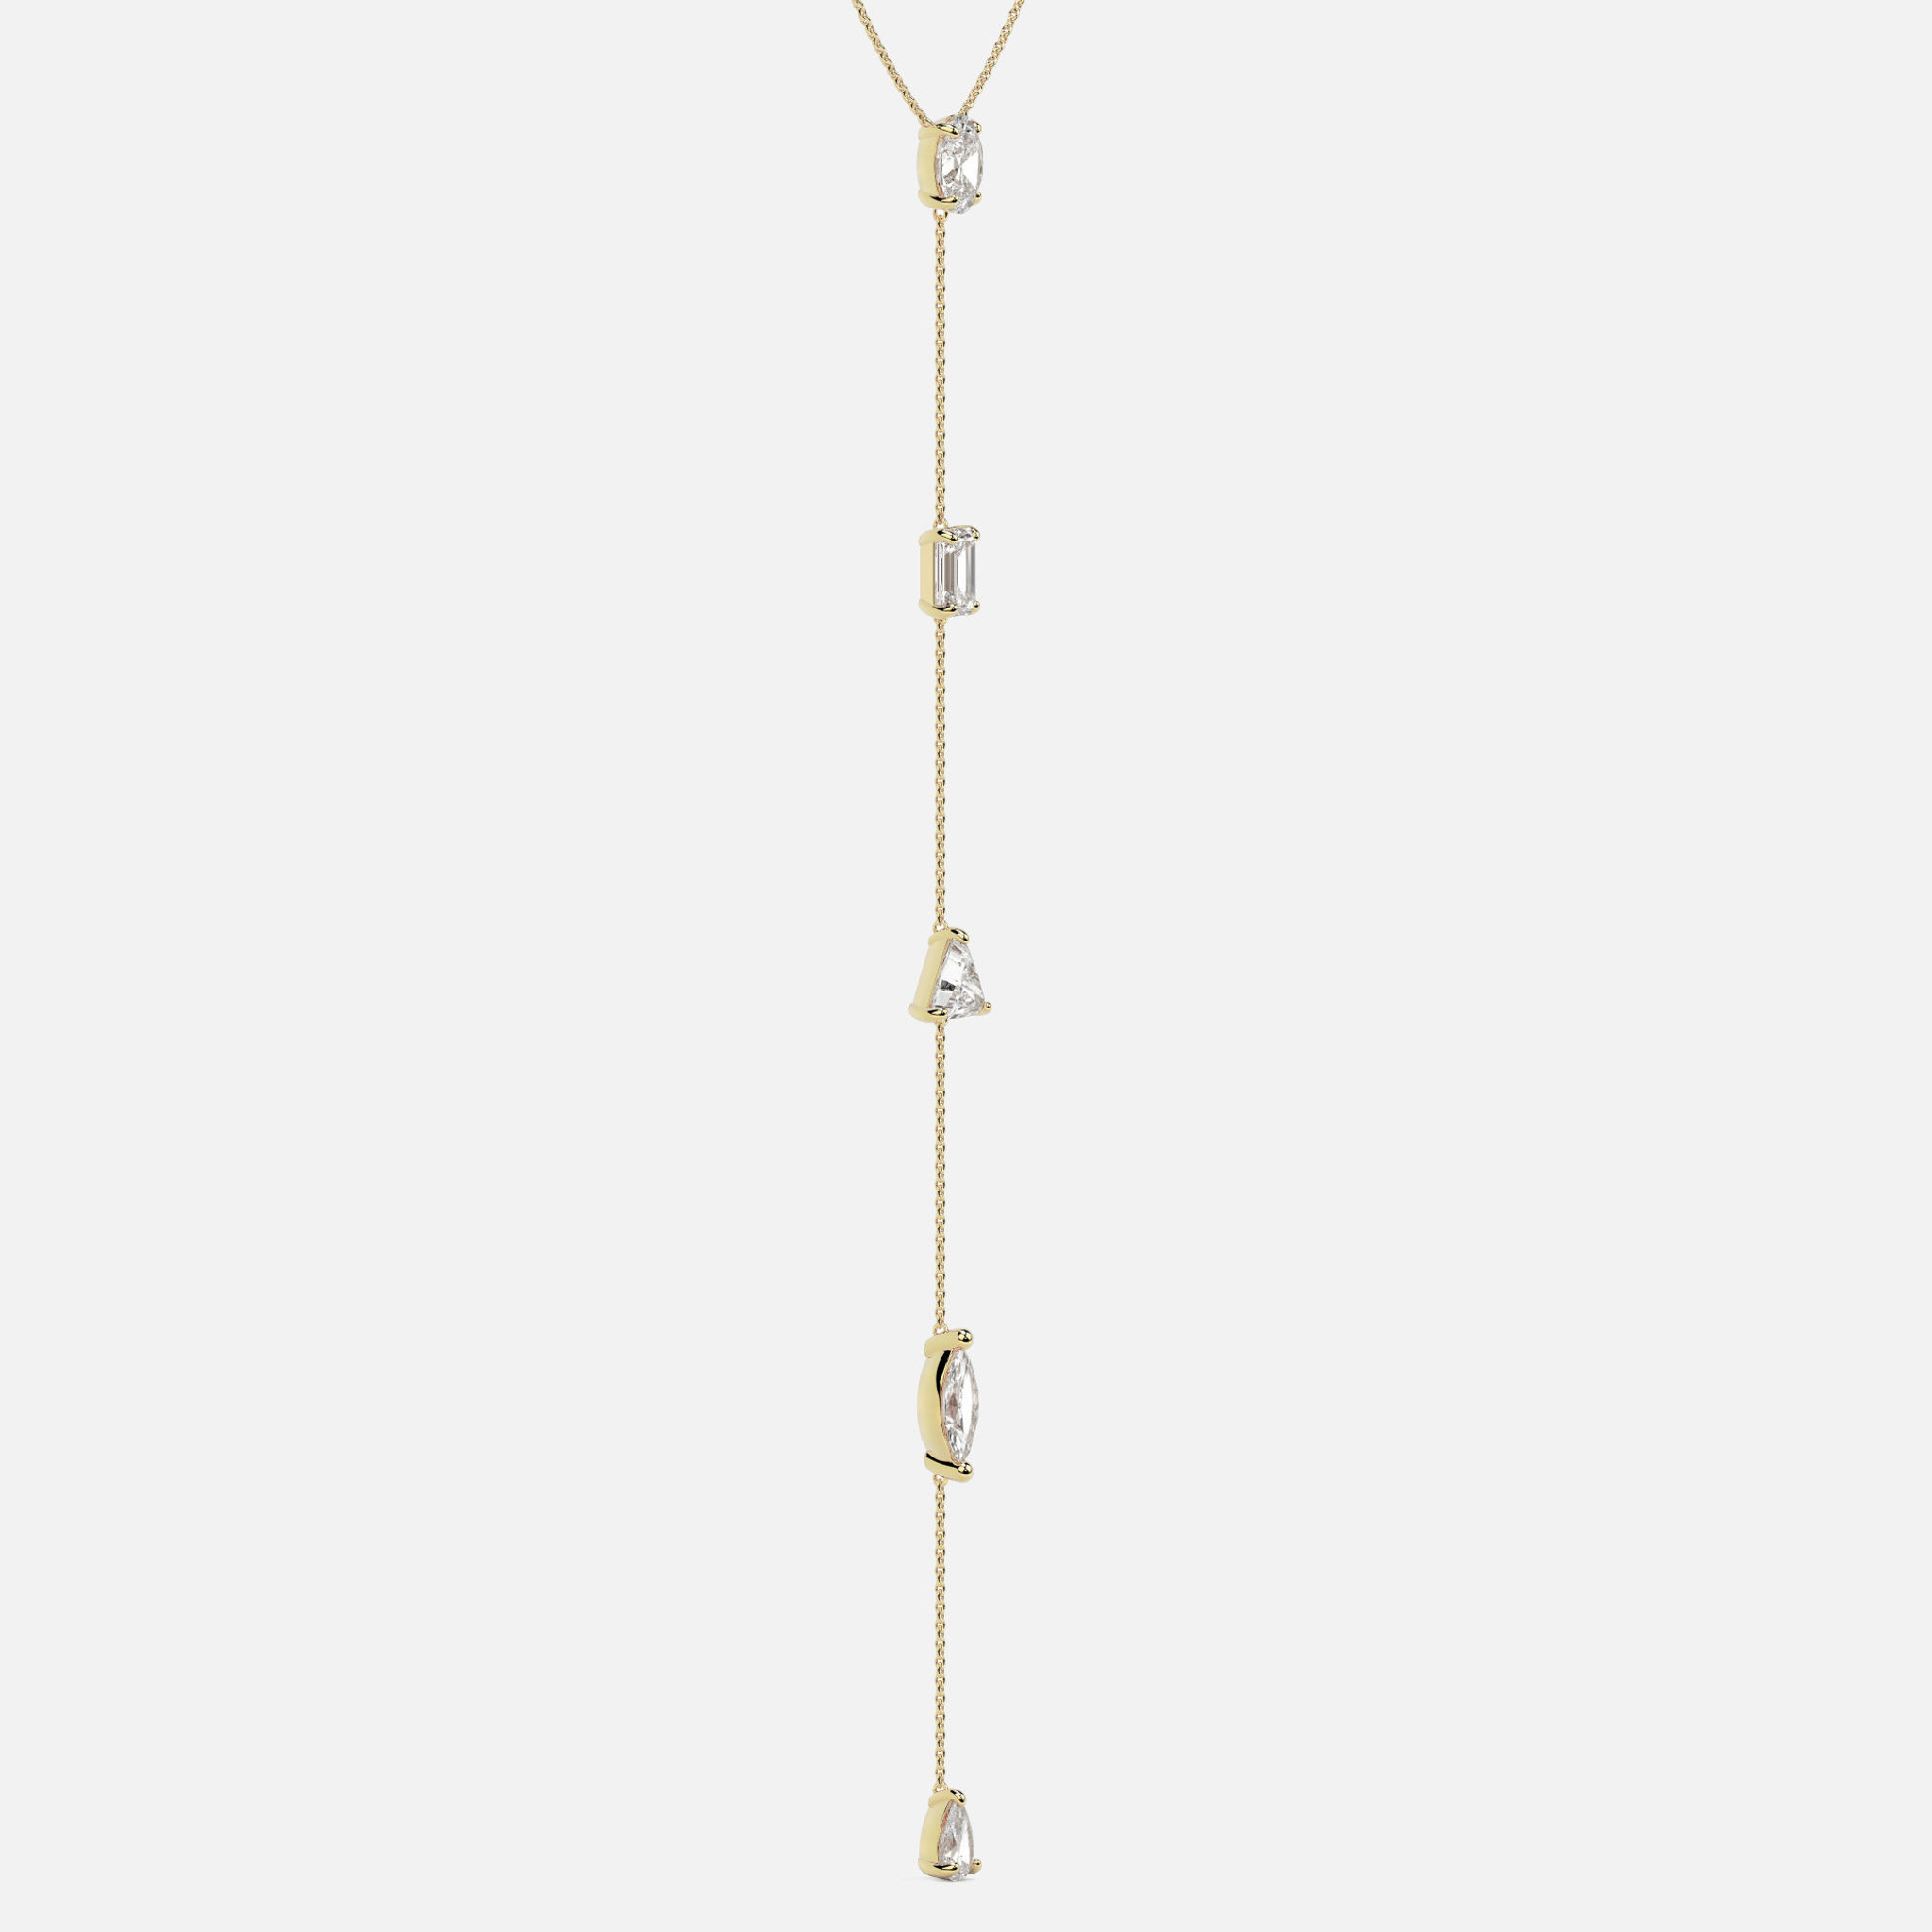 Adorn yourself with the elegance of an 18k gold diamond lariat necklace, featuring a dazzling array of 0.78 ct multi-cut stones in five distinct shapes.